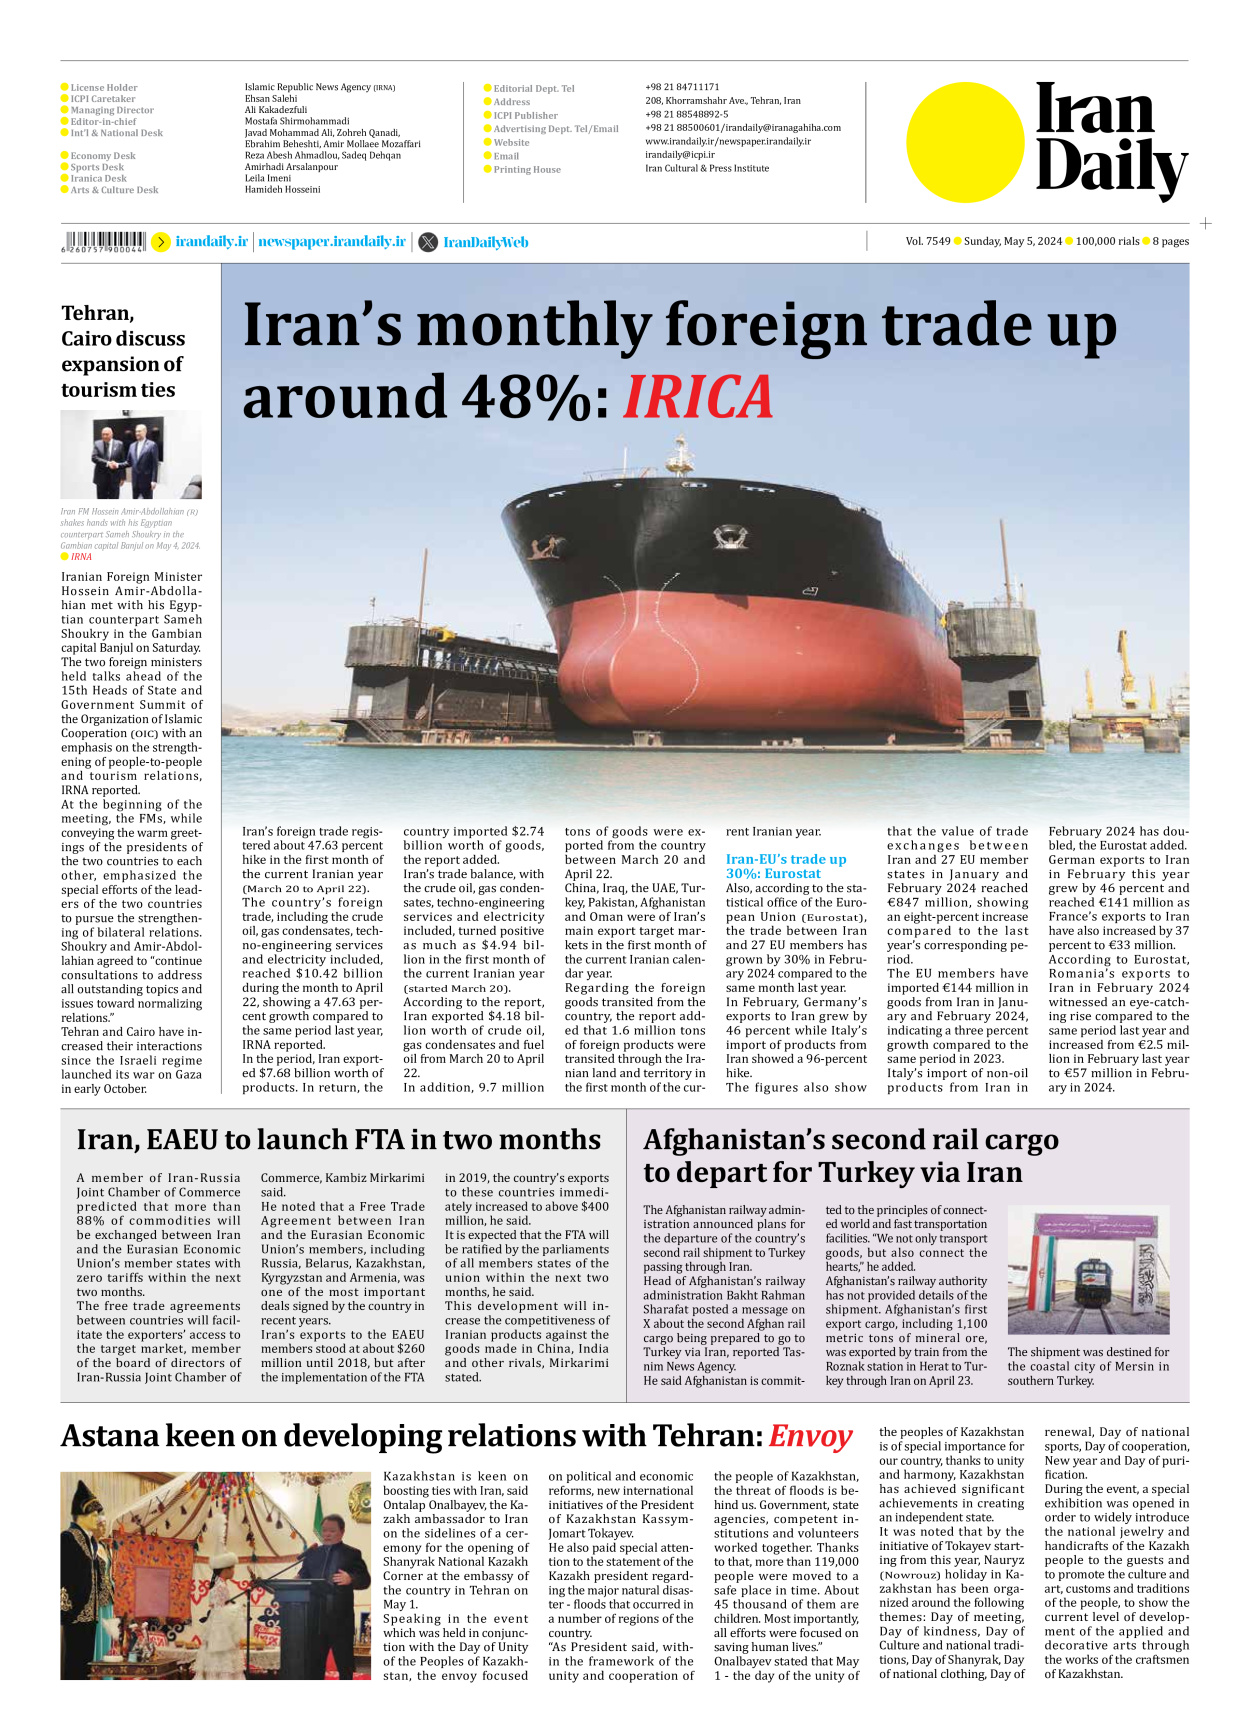 Iran Daily - Number Seven Thousand Five Hundred and Forty Nine - 05 May 2024 - Page 8